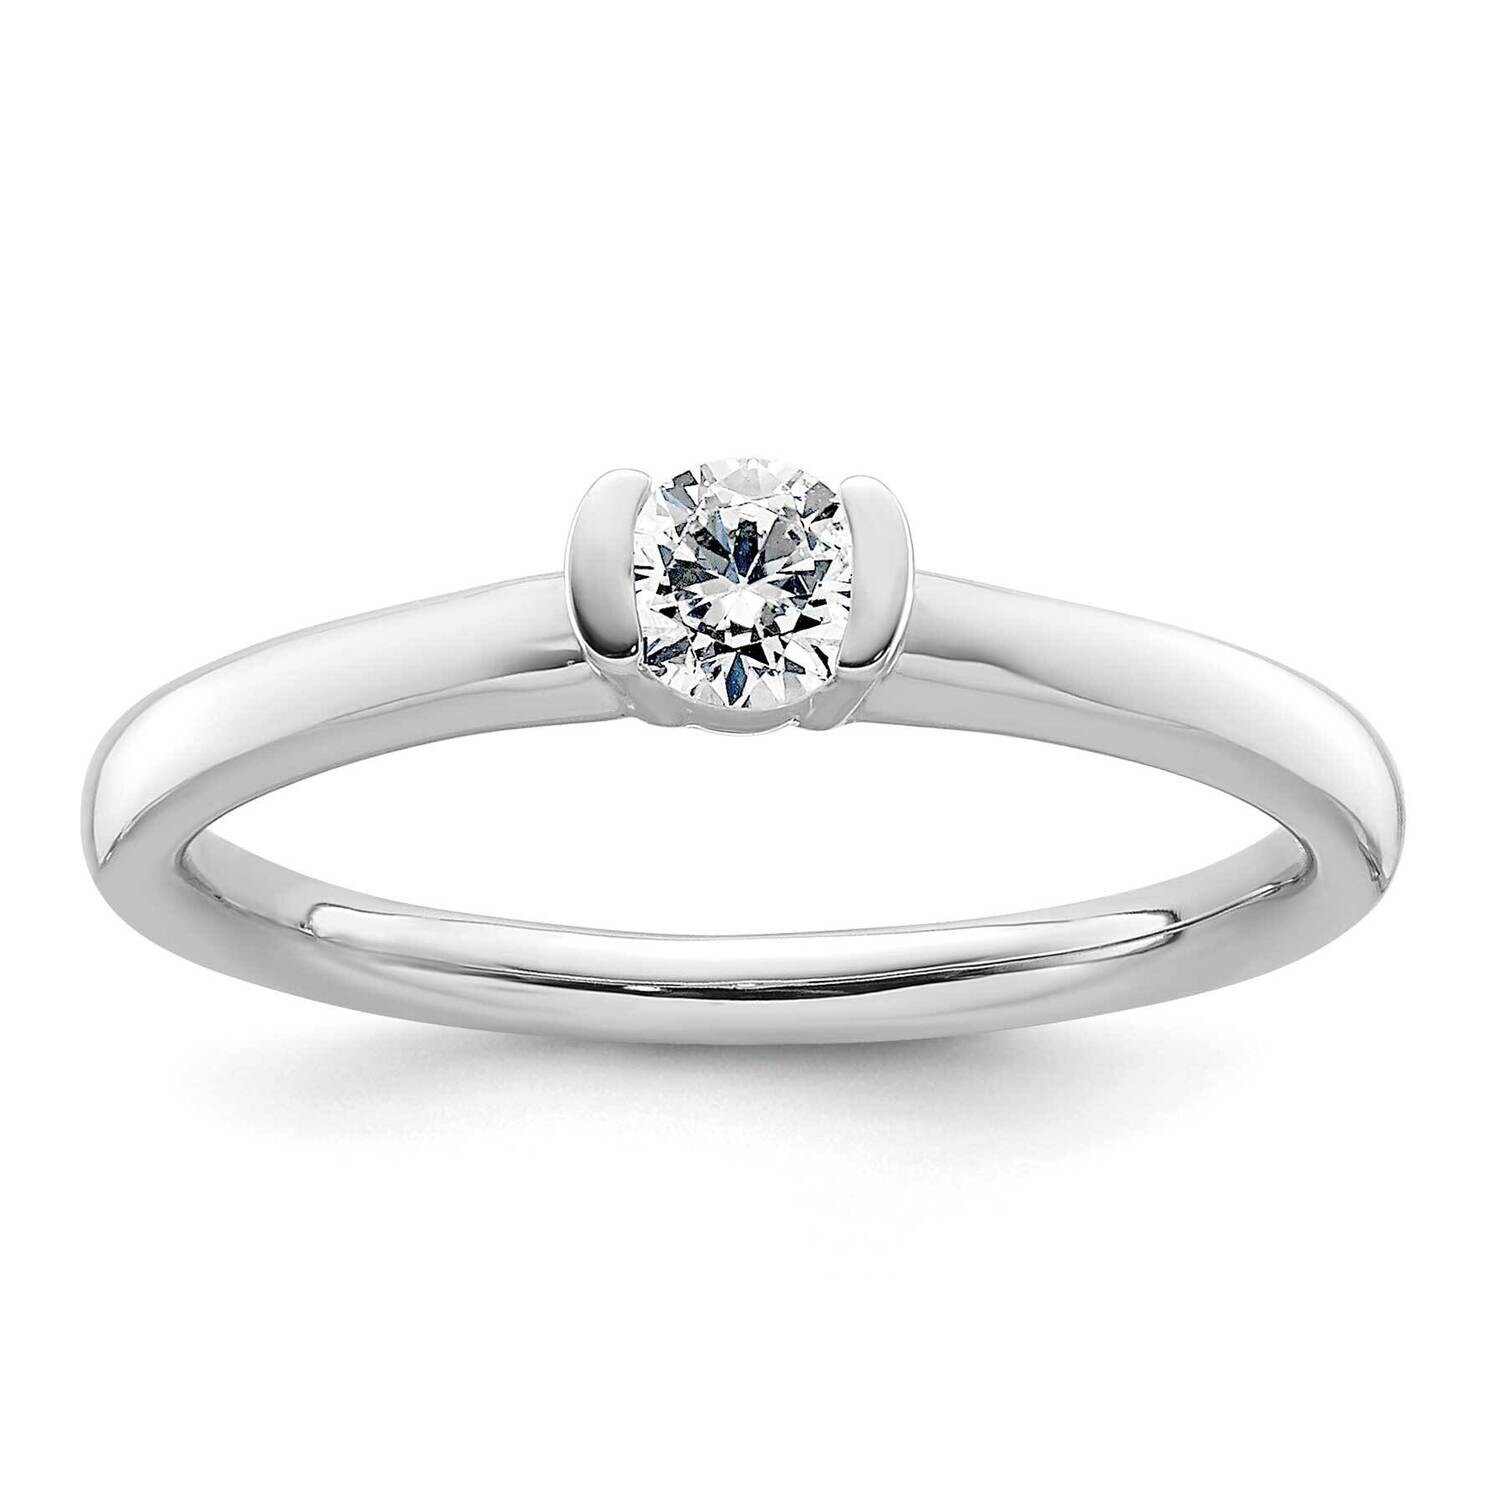 1/4 Carat 4.10 mm Half-Bezel Round Solitaire Engagement Ring Mounting 14k White Gold RM1953E-025-CWAA